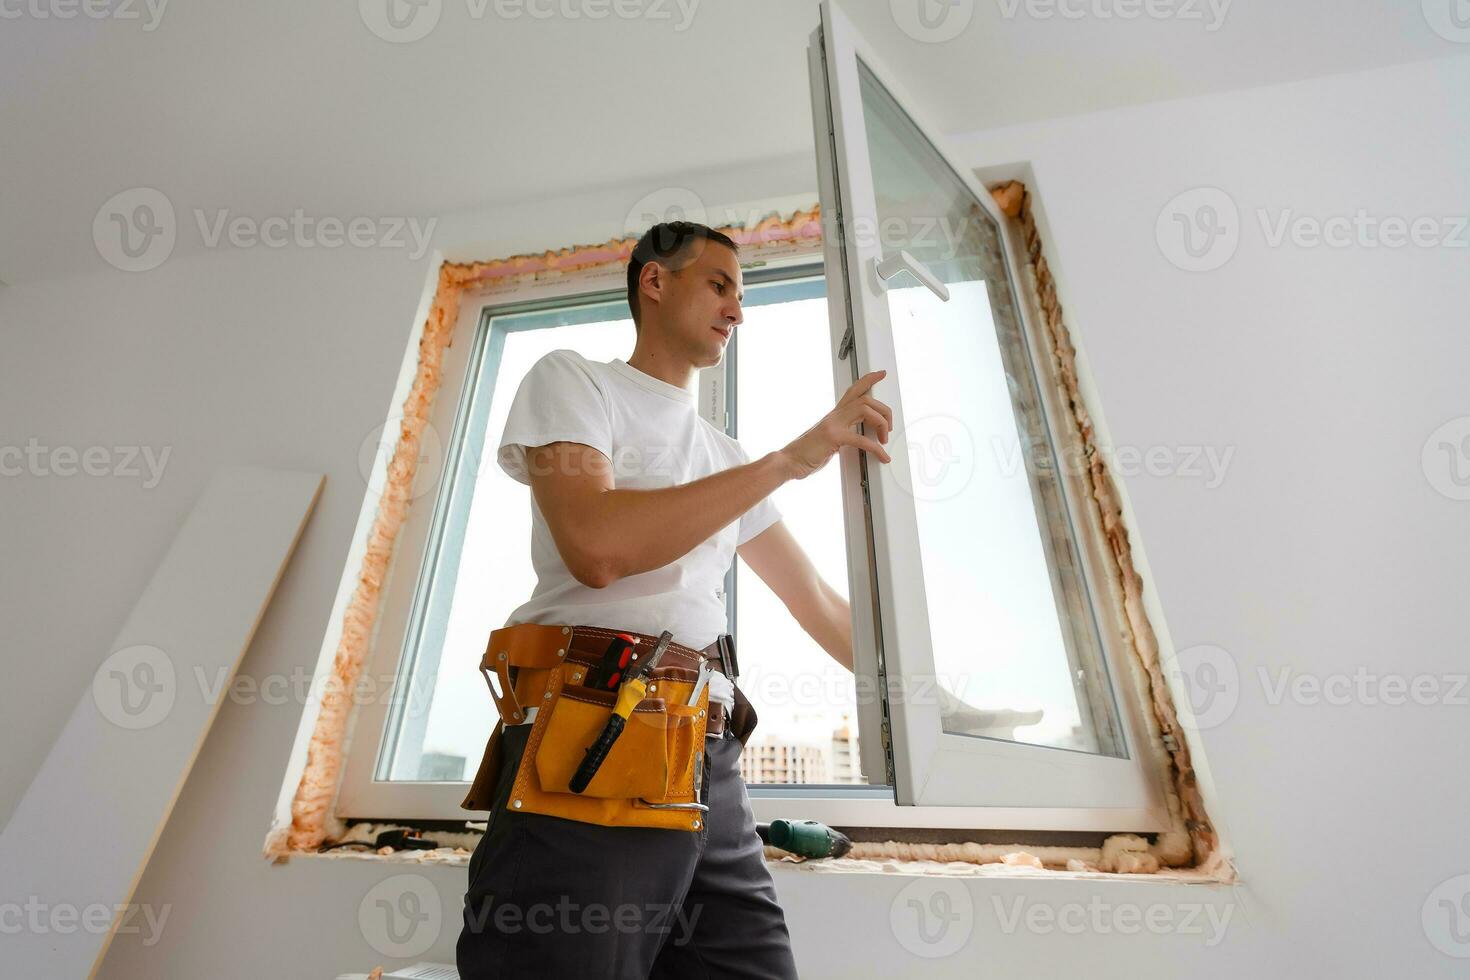 male industrial builder worker at window installation in building construction site photo